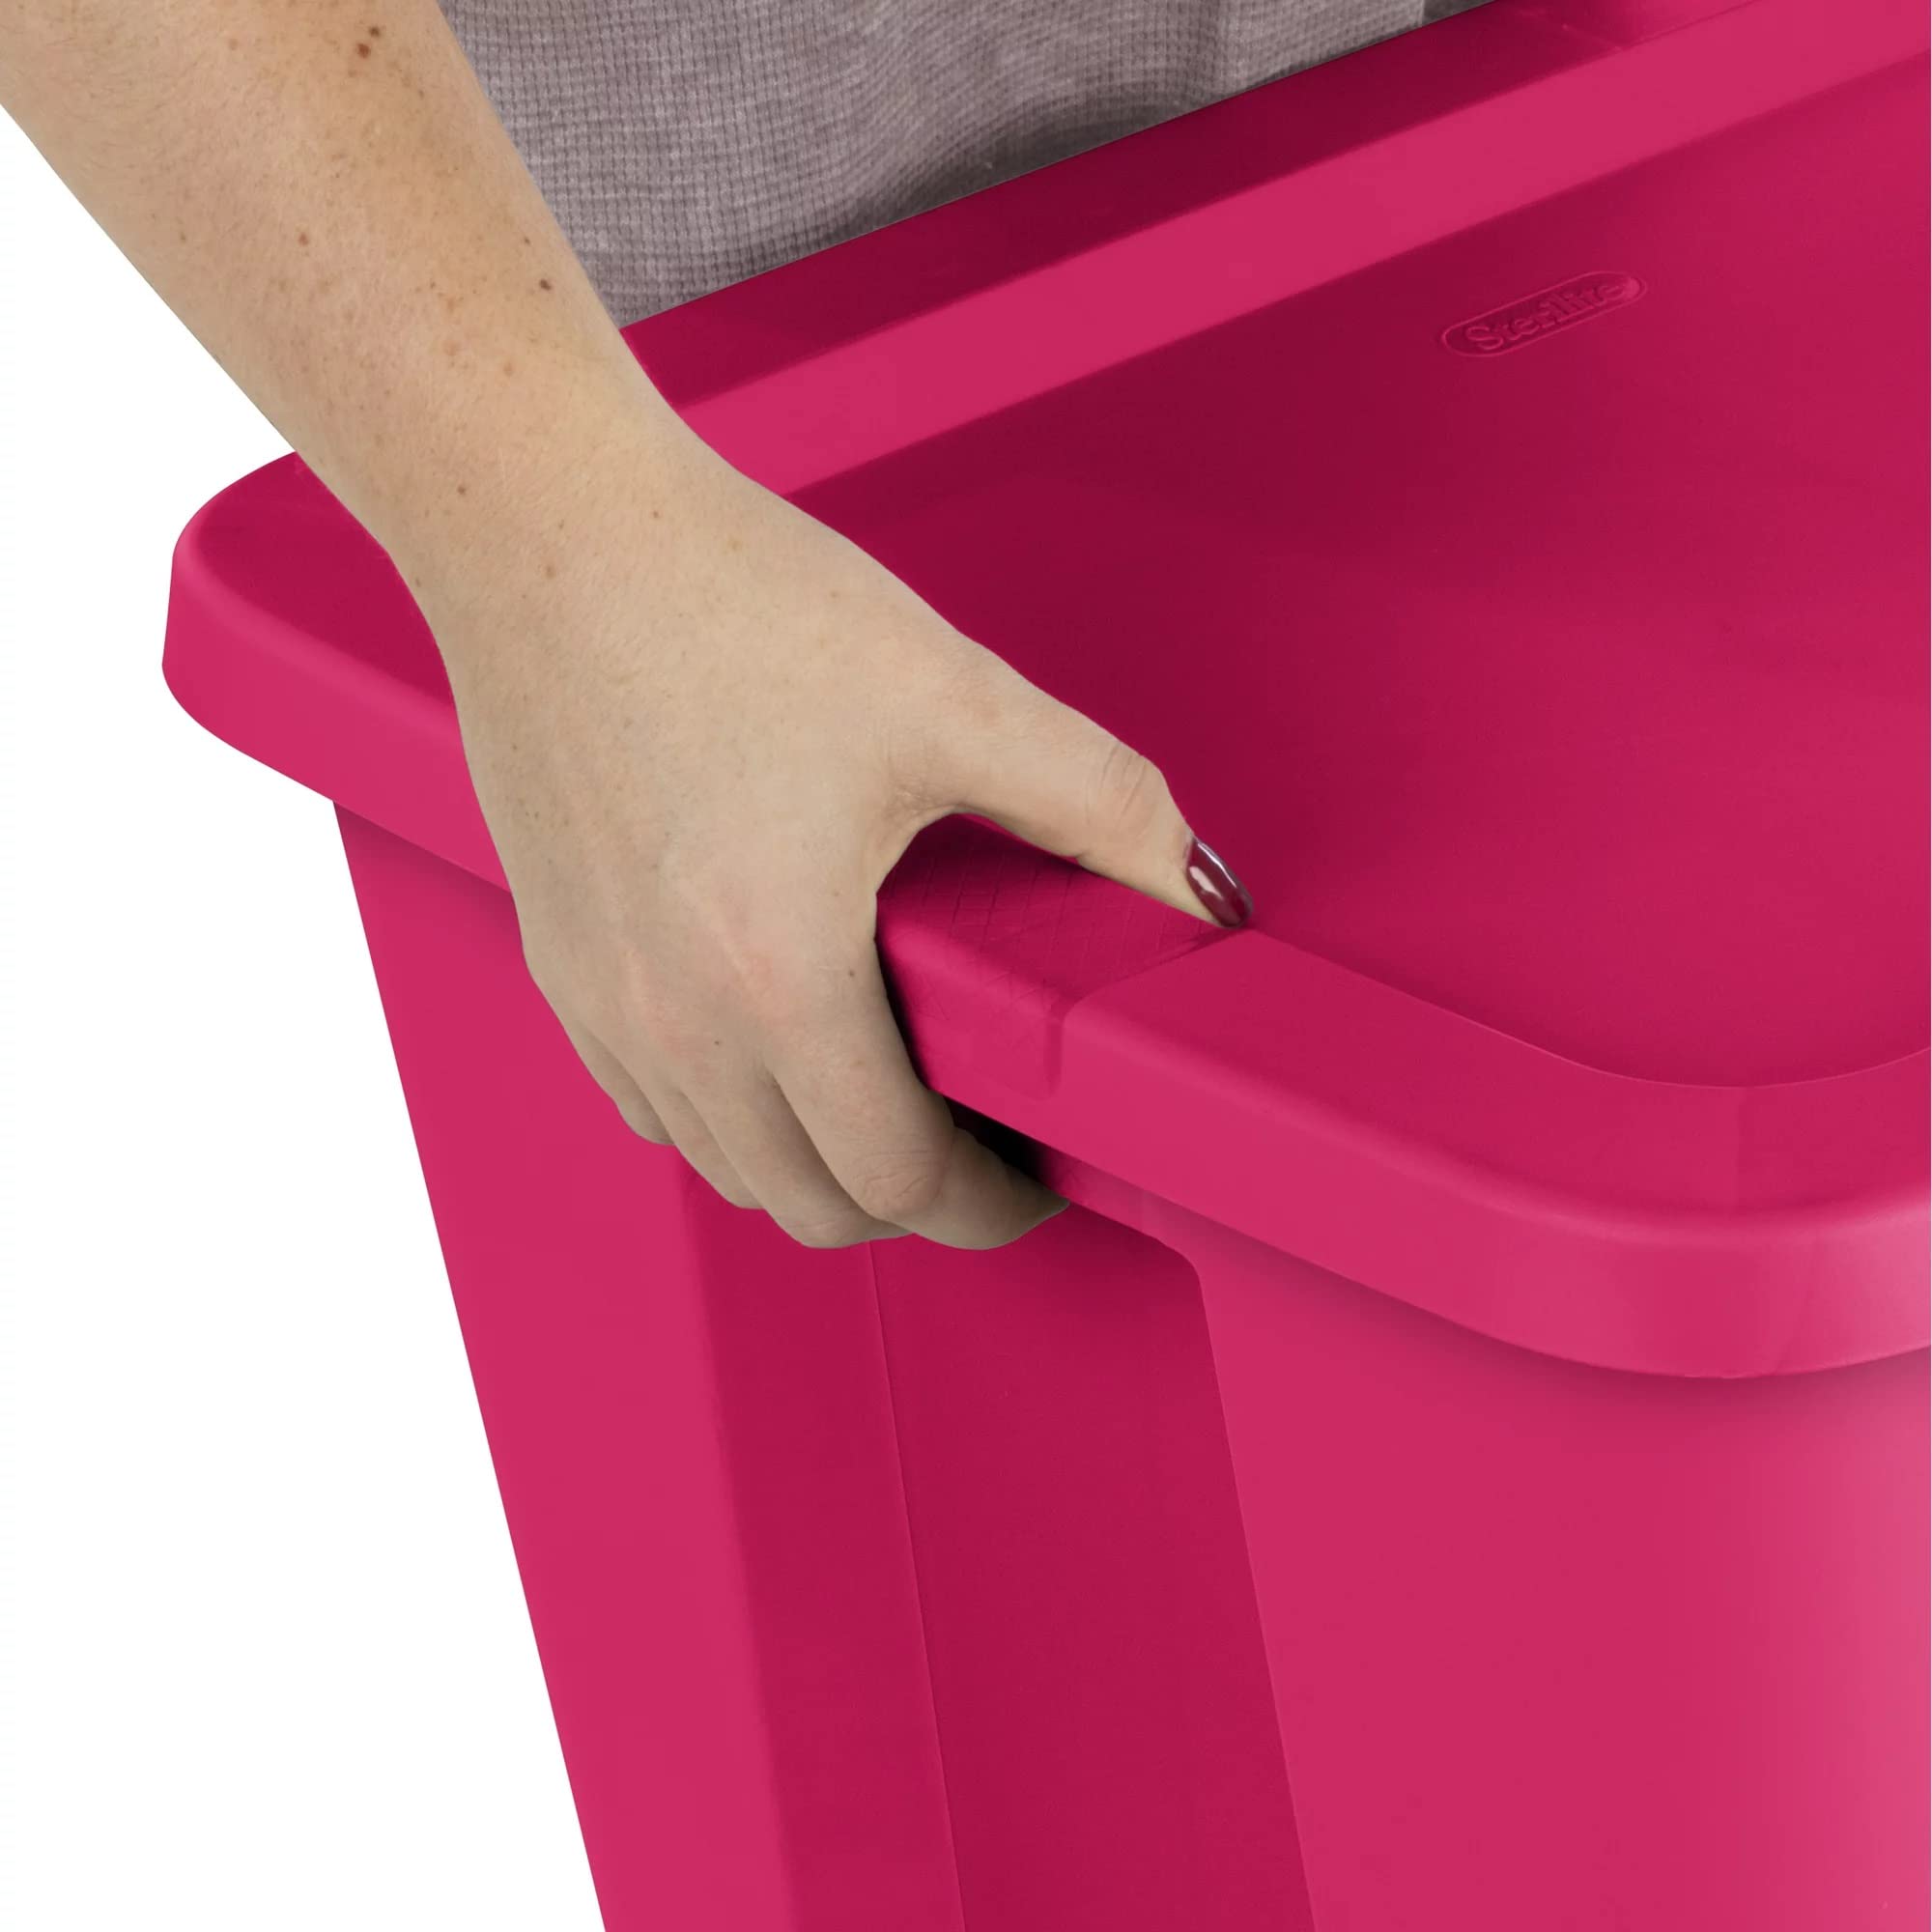 18 Gallon Plastic Storage Tote Box,Storage Bin Tote Organizing Container With Durable Lid, Stackable and Nestable Snap Lid Plastic Storage Bin,Fuchsia Burst,Set of 8